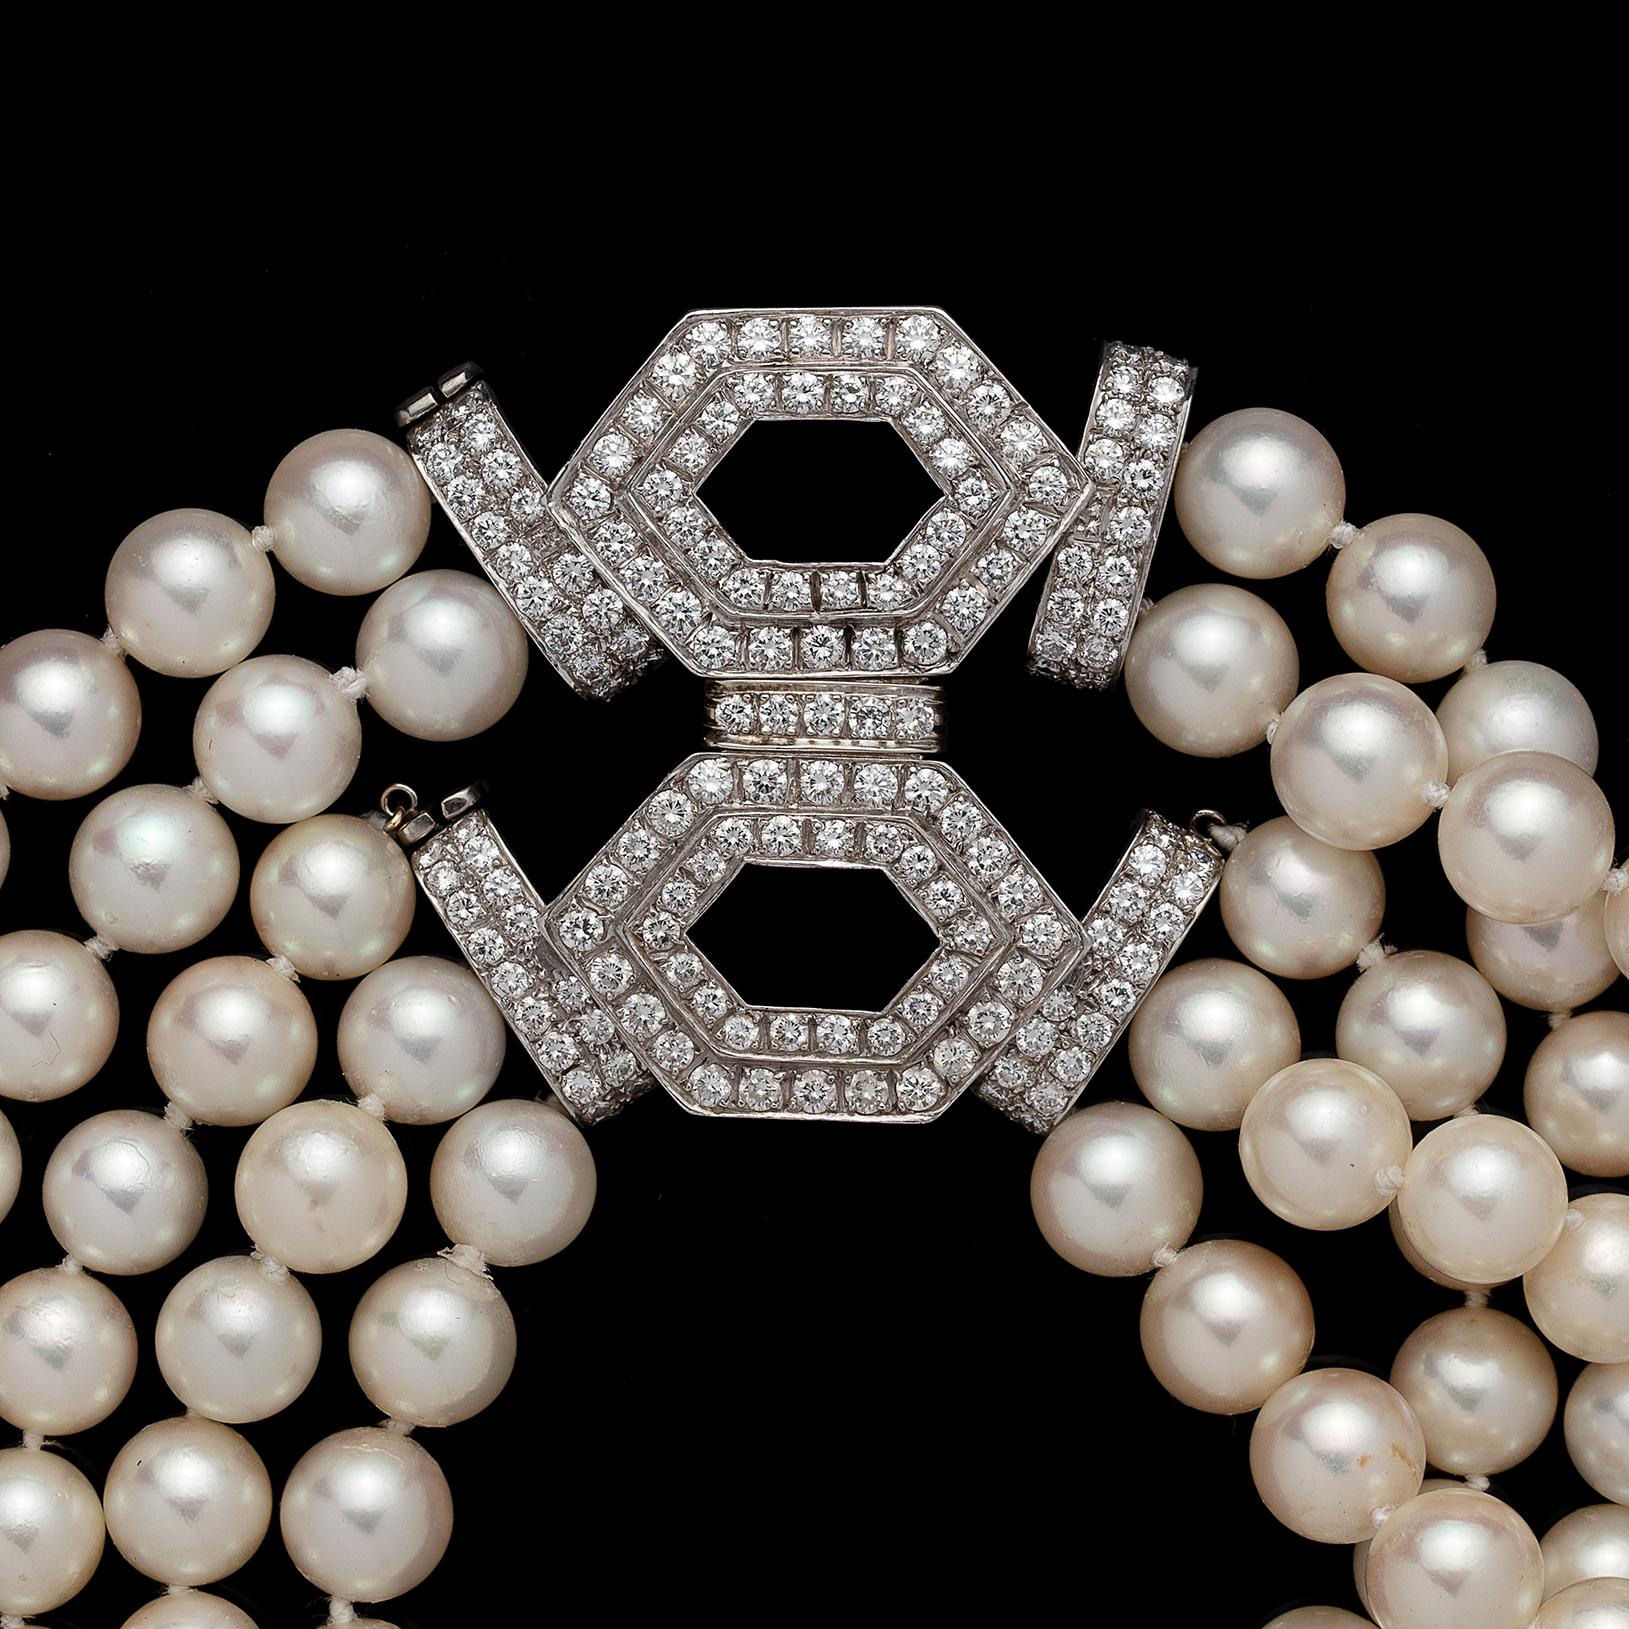 A stunning necklace that is convertible! Designed with 5 strands of 8.5mm cultured pearls, high luster with rose tones, completed by a round brilliant-cut diamond set geometric design clasp totaling 5.55 carats. The necklace can also be separated